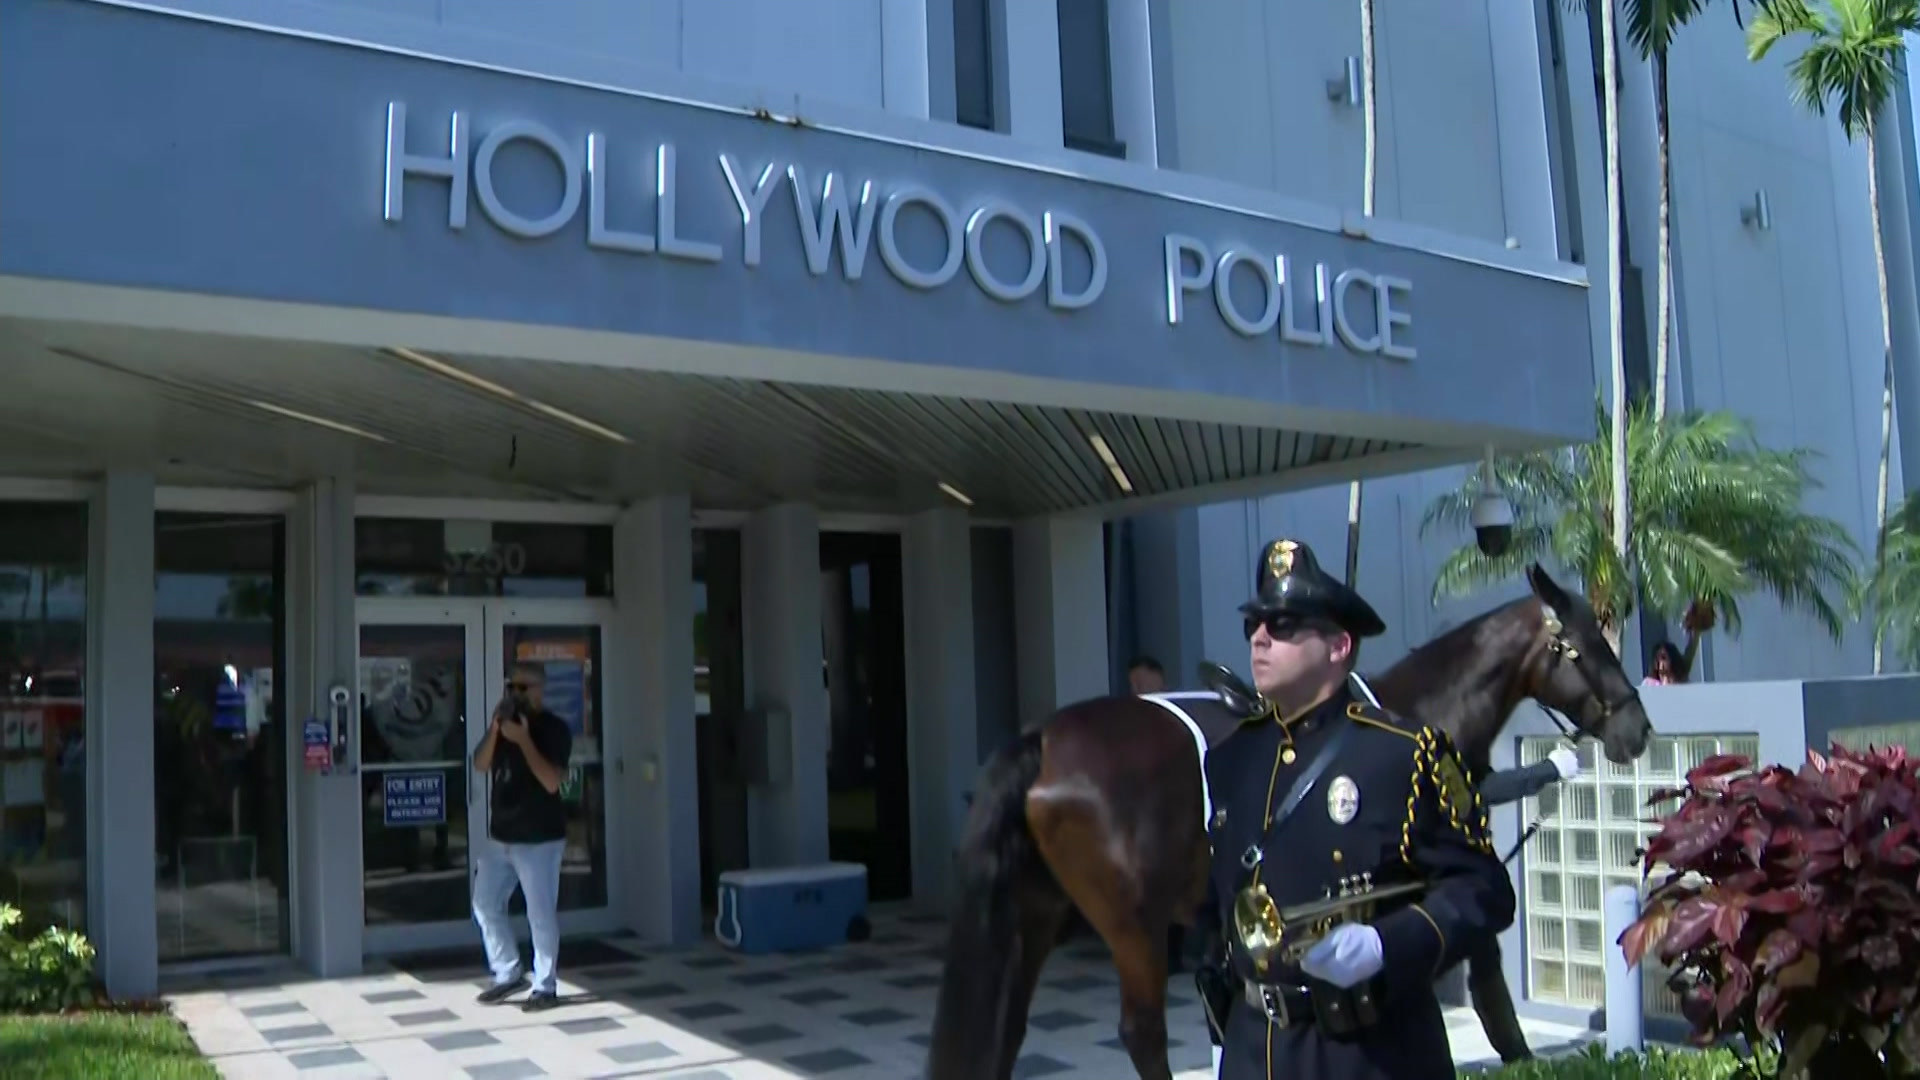 ‘In the Most Somber Times We Come Together’: Hollywood Police Remember The Fallen